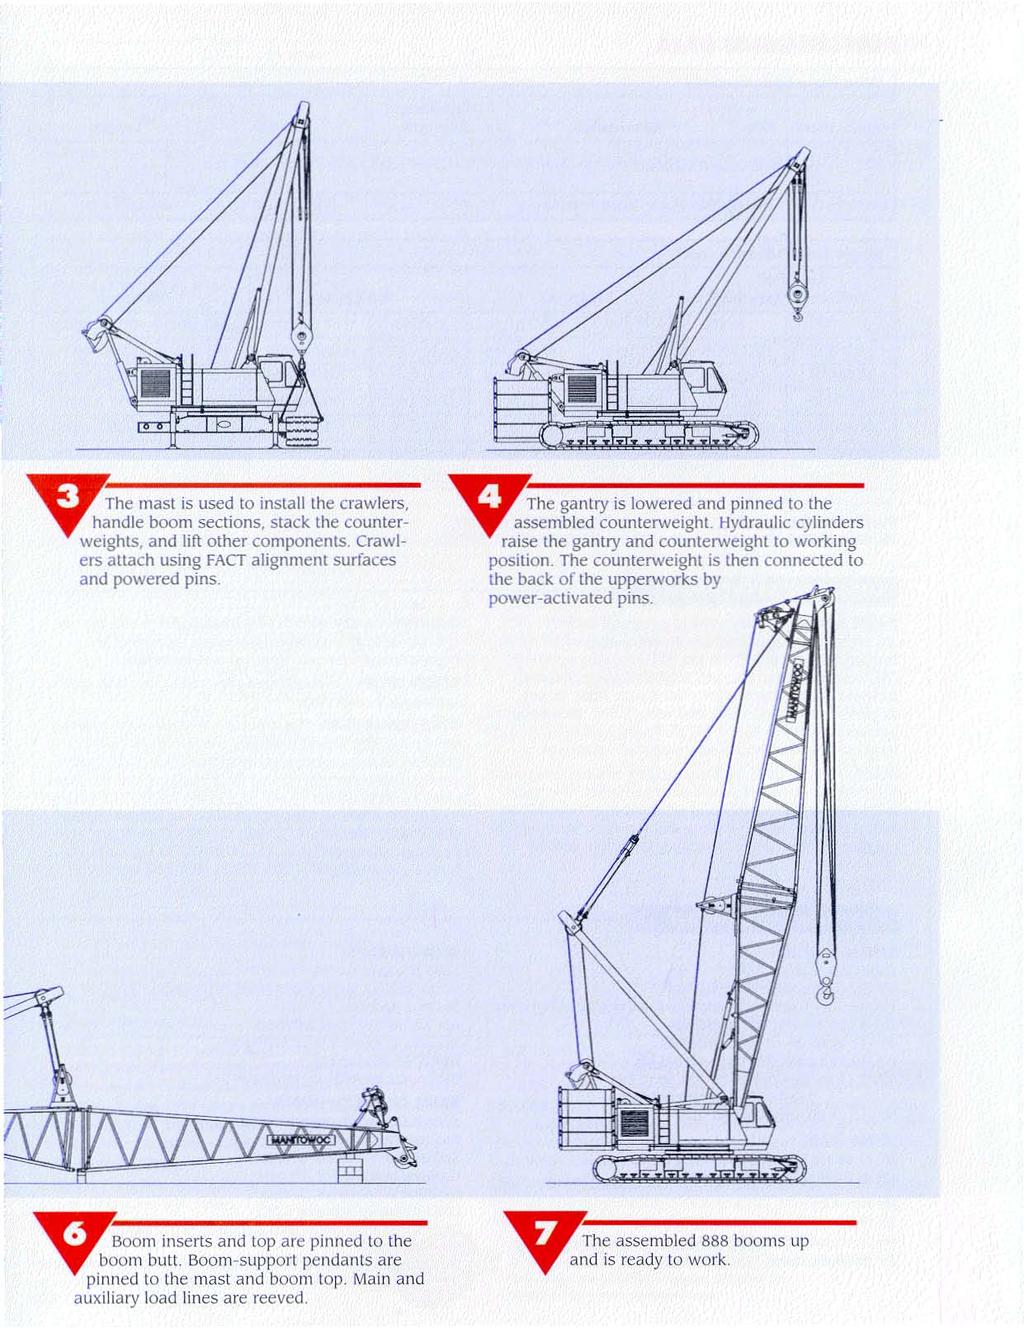 ~he mast is used to install the crawlers. T h~ndle boom sections, stack the counterweights, and lift other components. Crawlers attach using FACT alignment surfaces and powered pins.